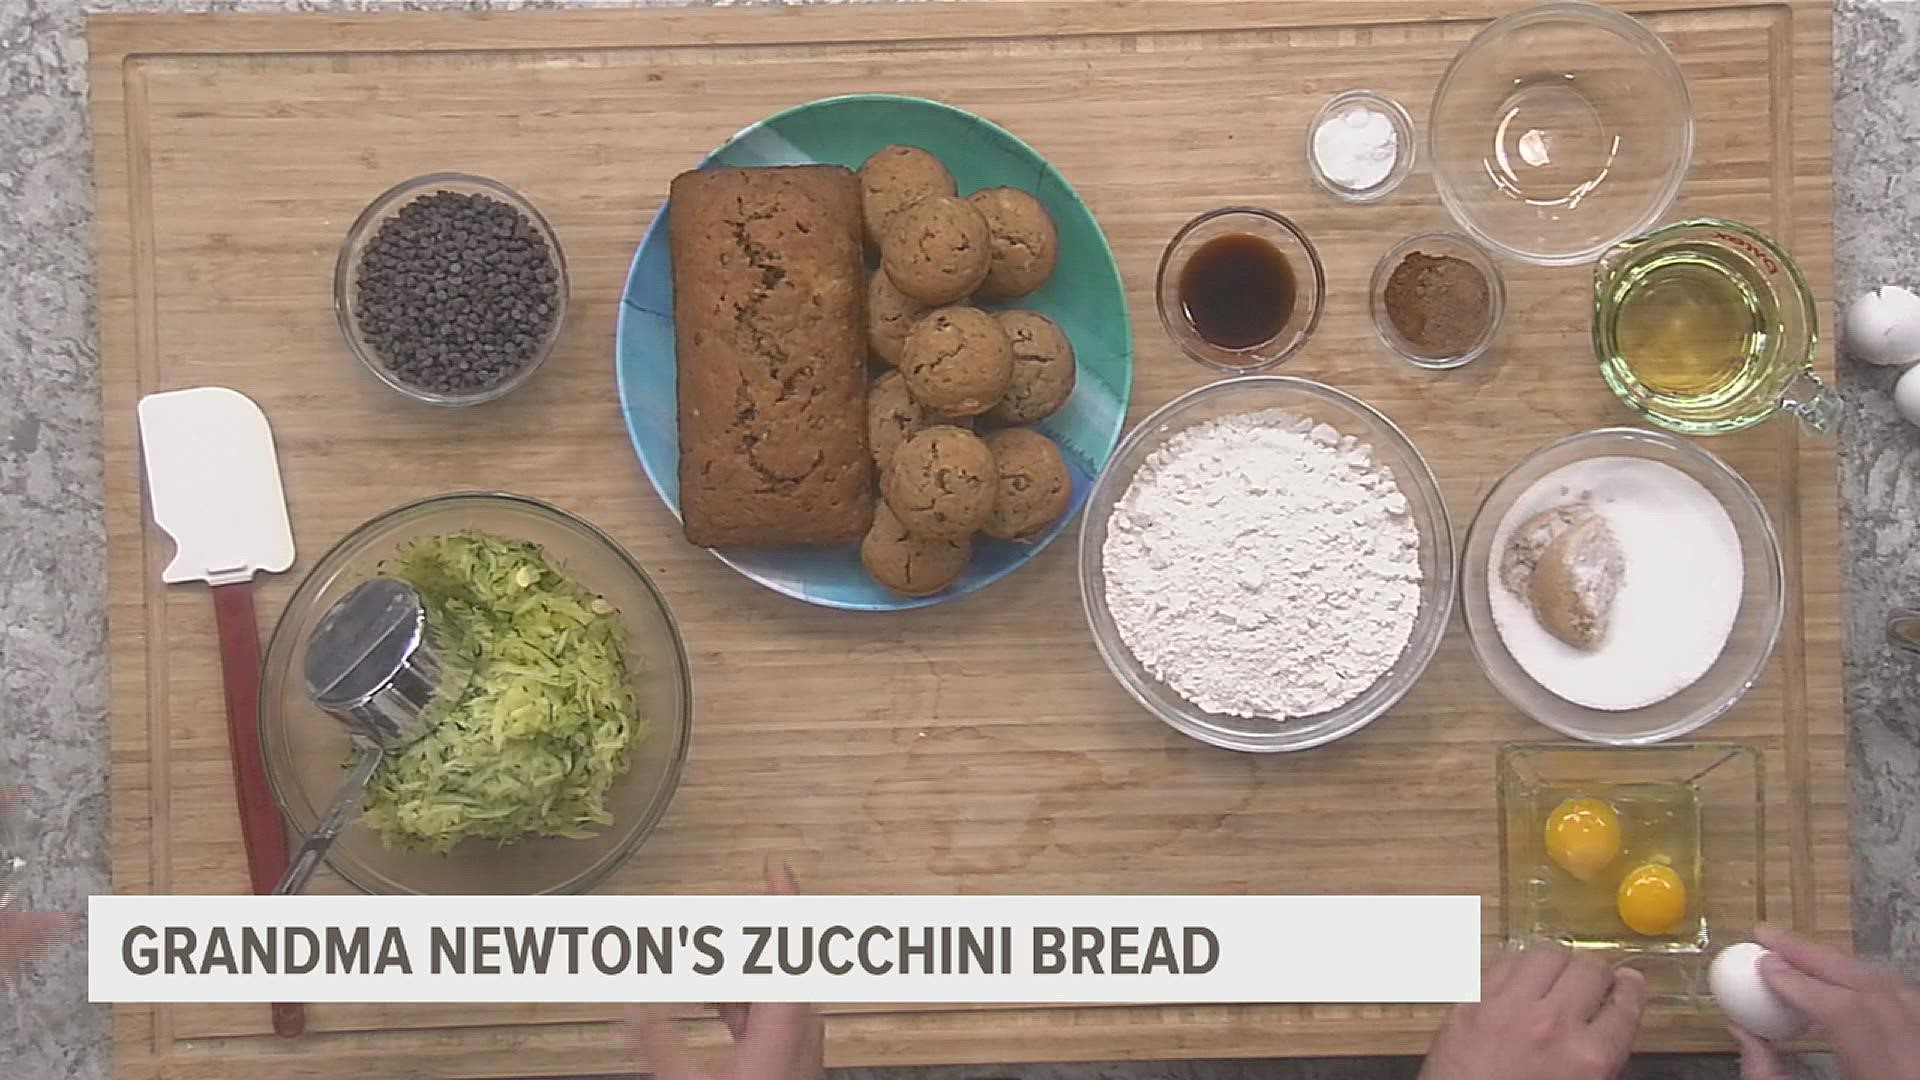 News 8' David Bohlman breaks open the family cookbook with Chocolate Chip Zucchini Bread recipe from his grandmother